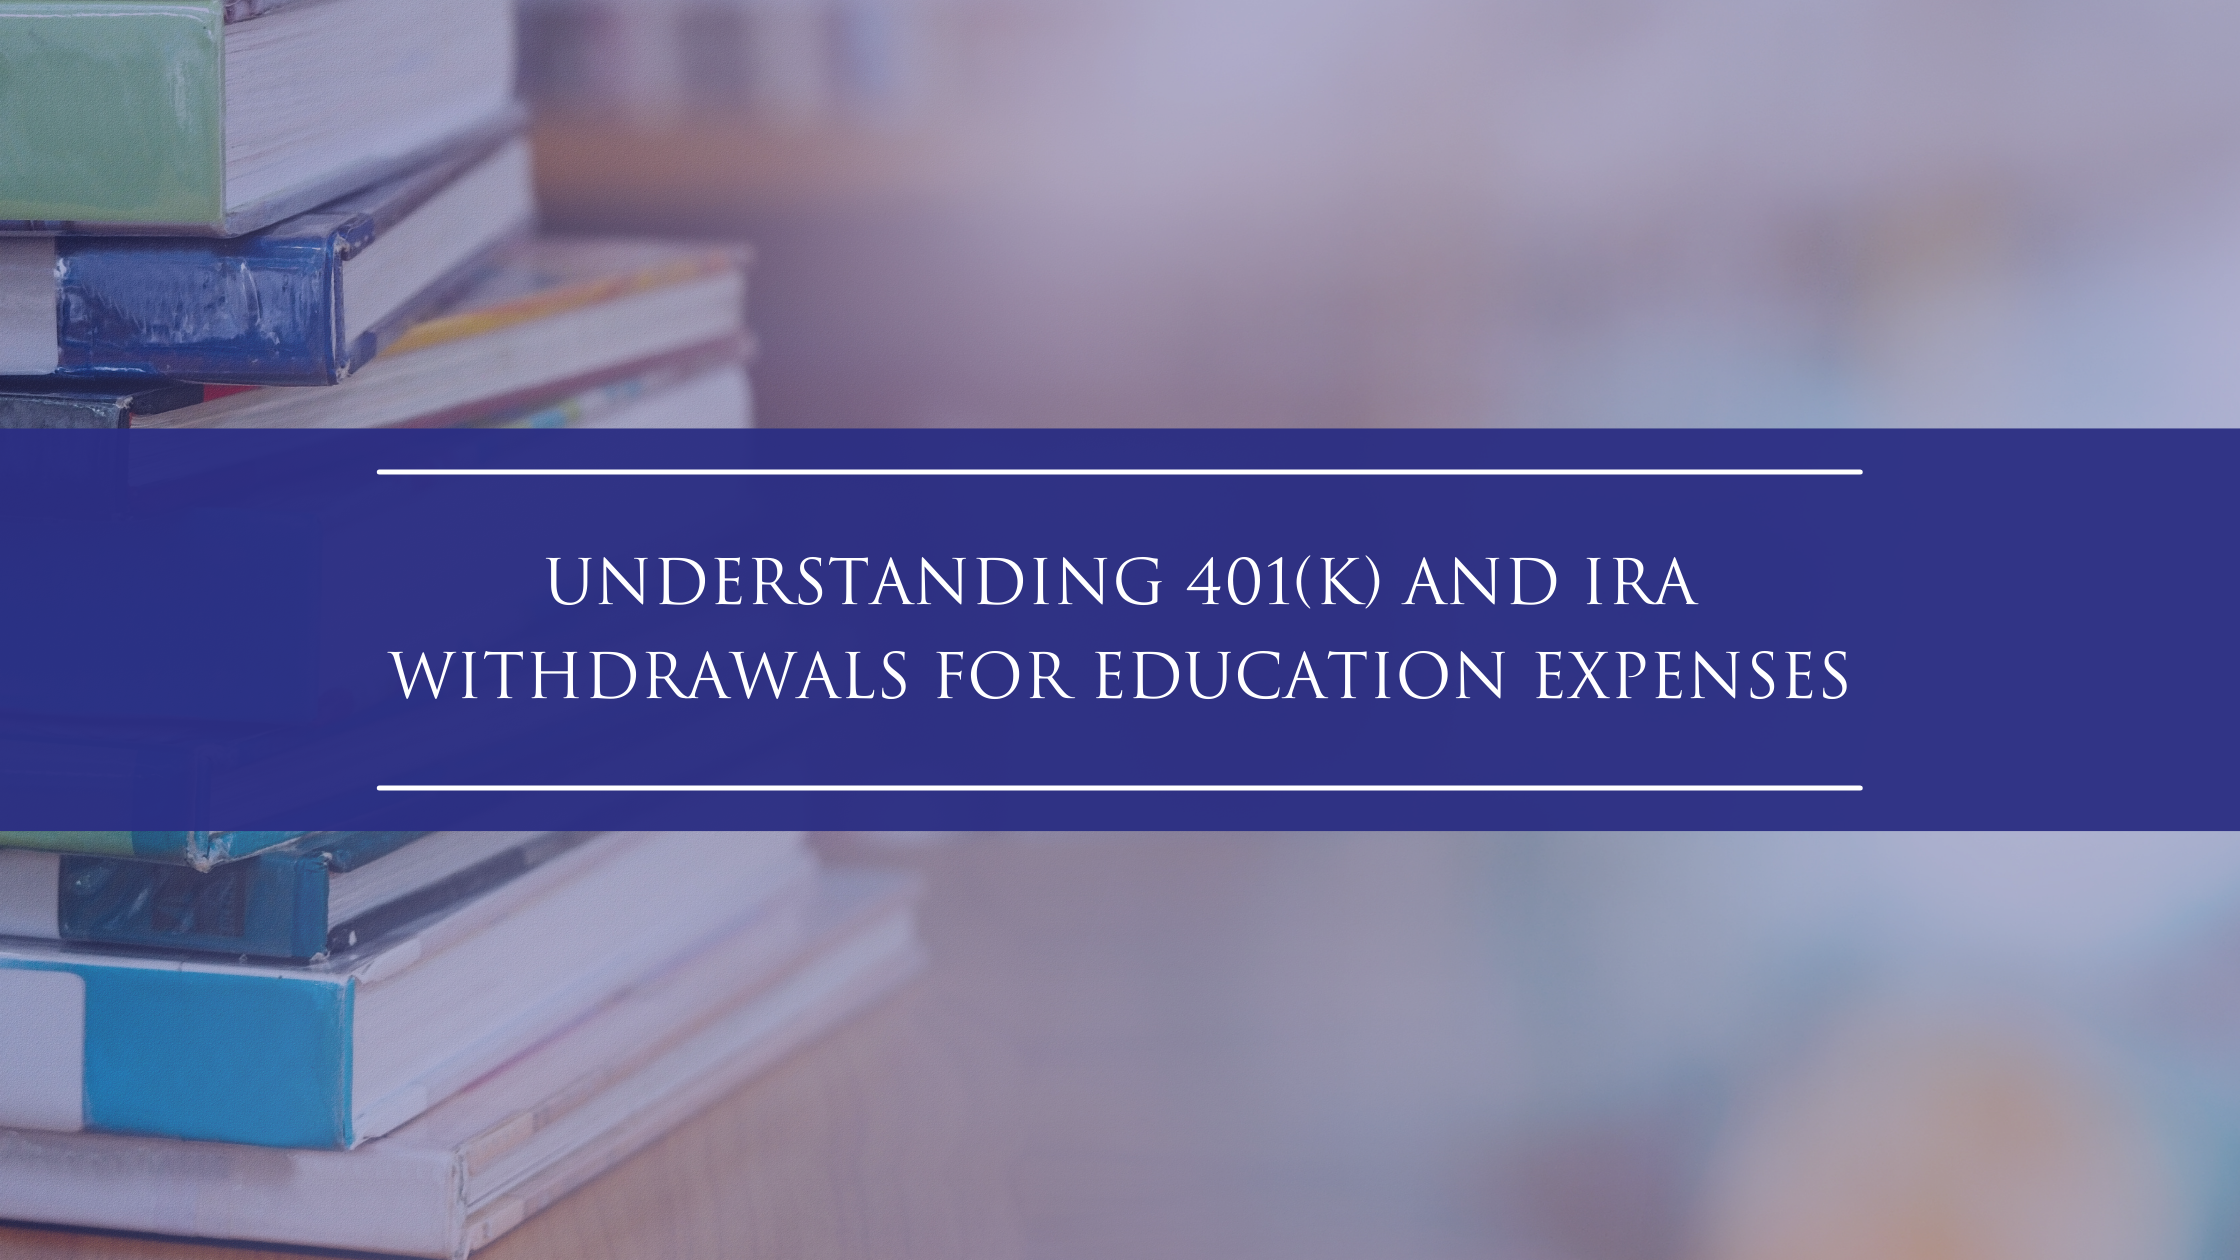 Understanding 401(k) and IRA Withdrawals for Education Expenses